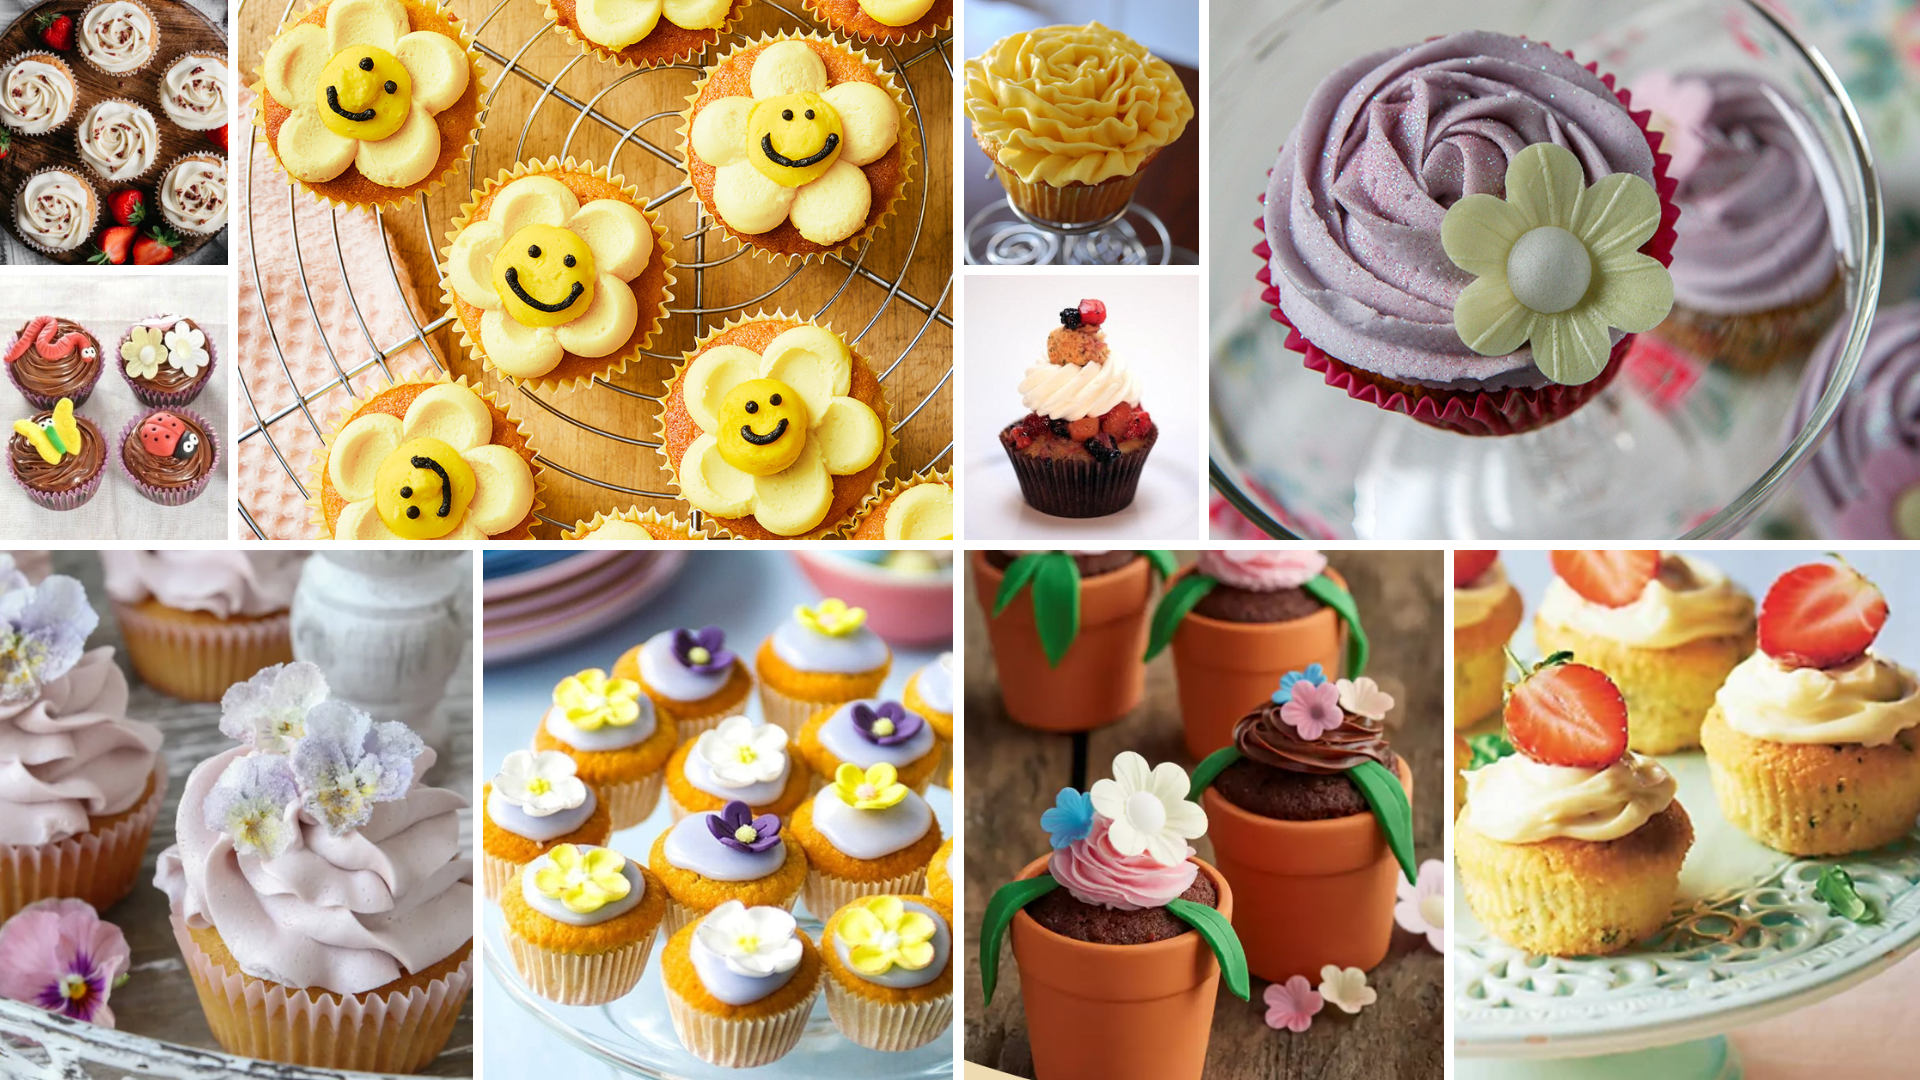 21 Cupcakes for Spring